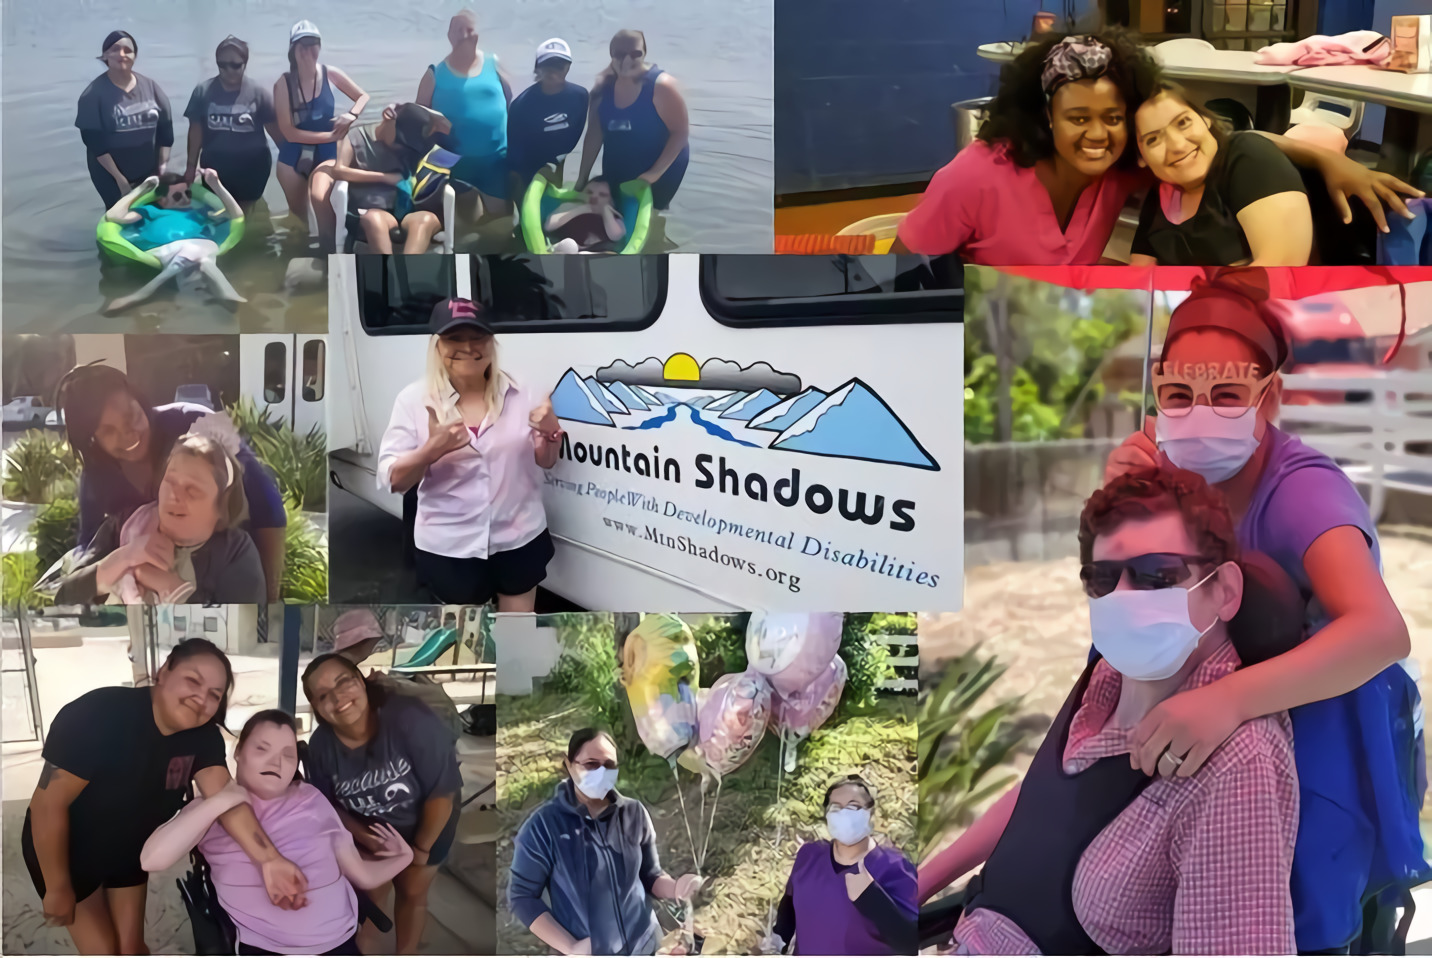 Mountain Shadows Support Group